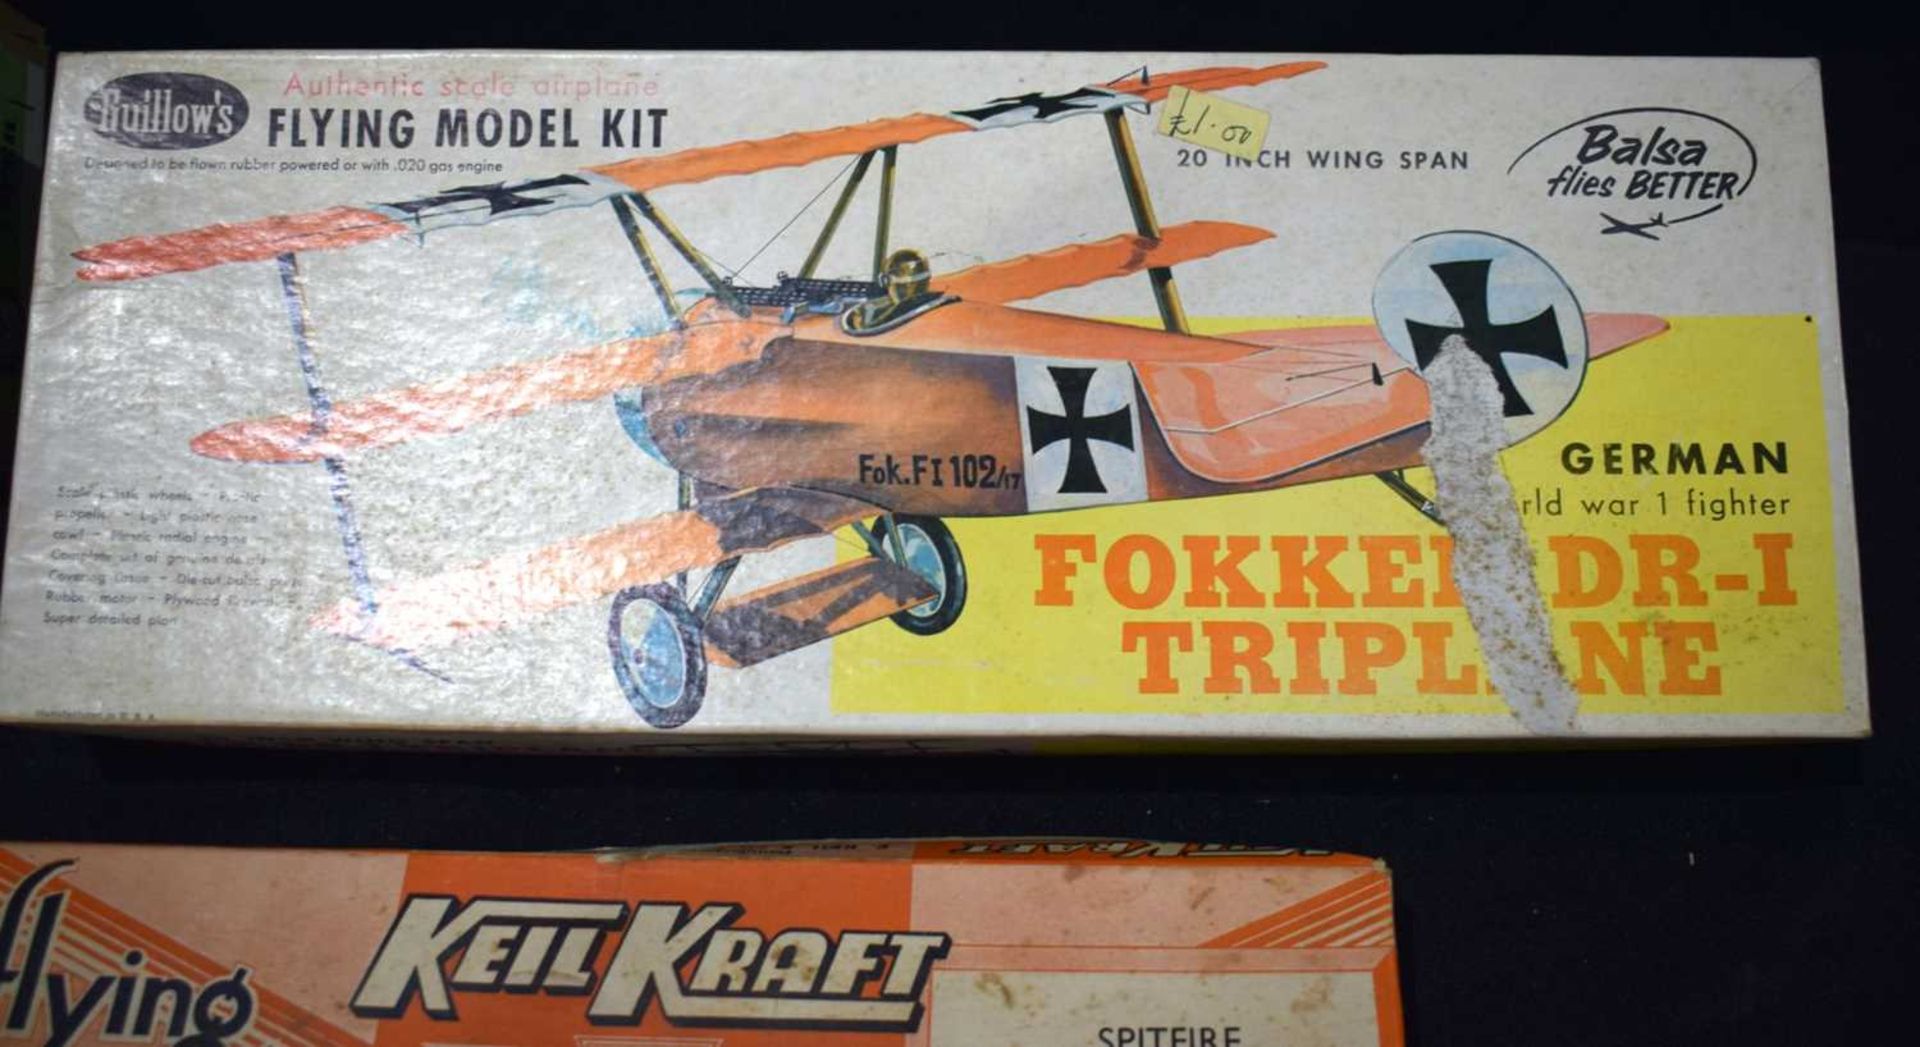 A Collection of boxed model aircraft Kits Keil Crafts, Guillow's etc (6) - Image 4 of 5